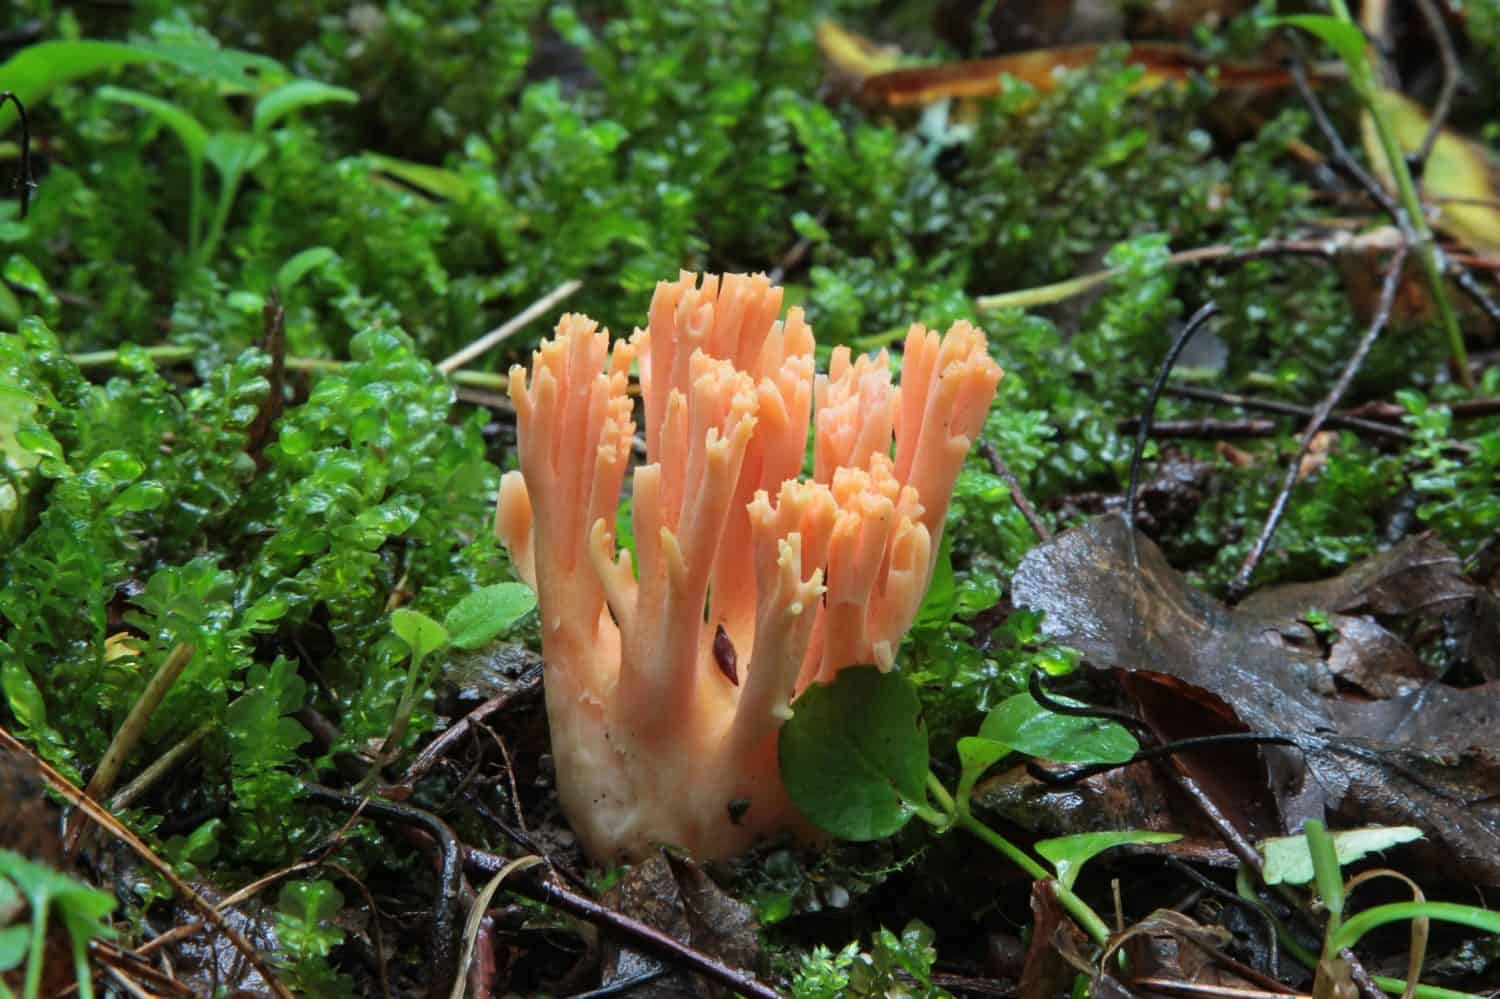 Ramaria formosa - salmon coral in a coniferous forest. Very rare and beautiful mushroom.